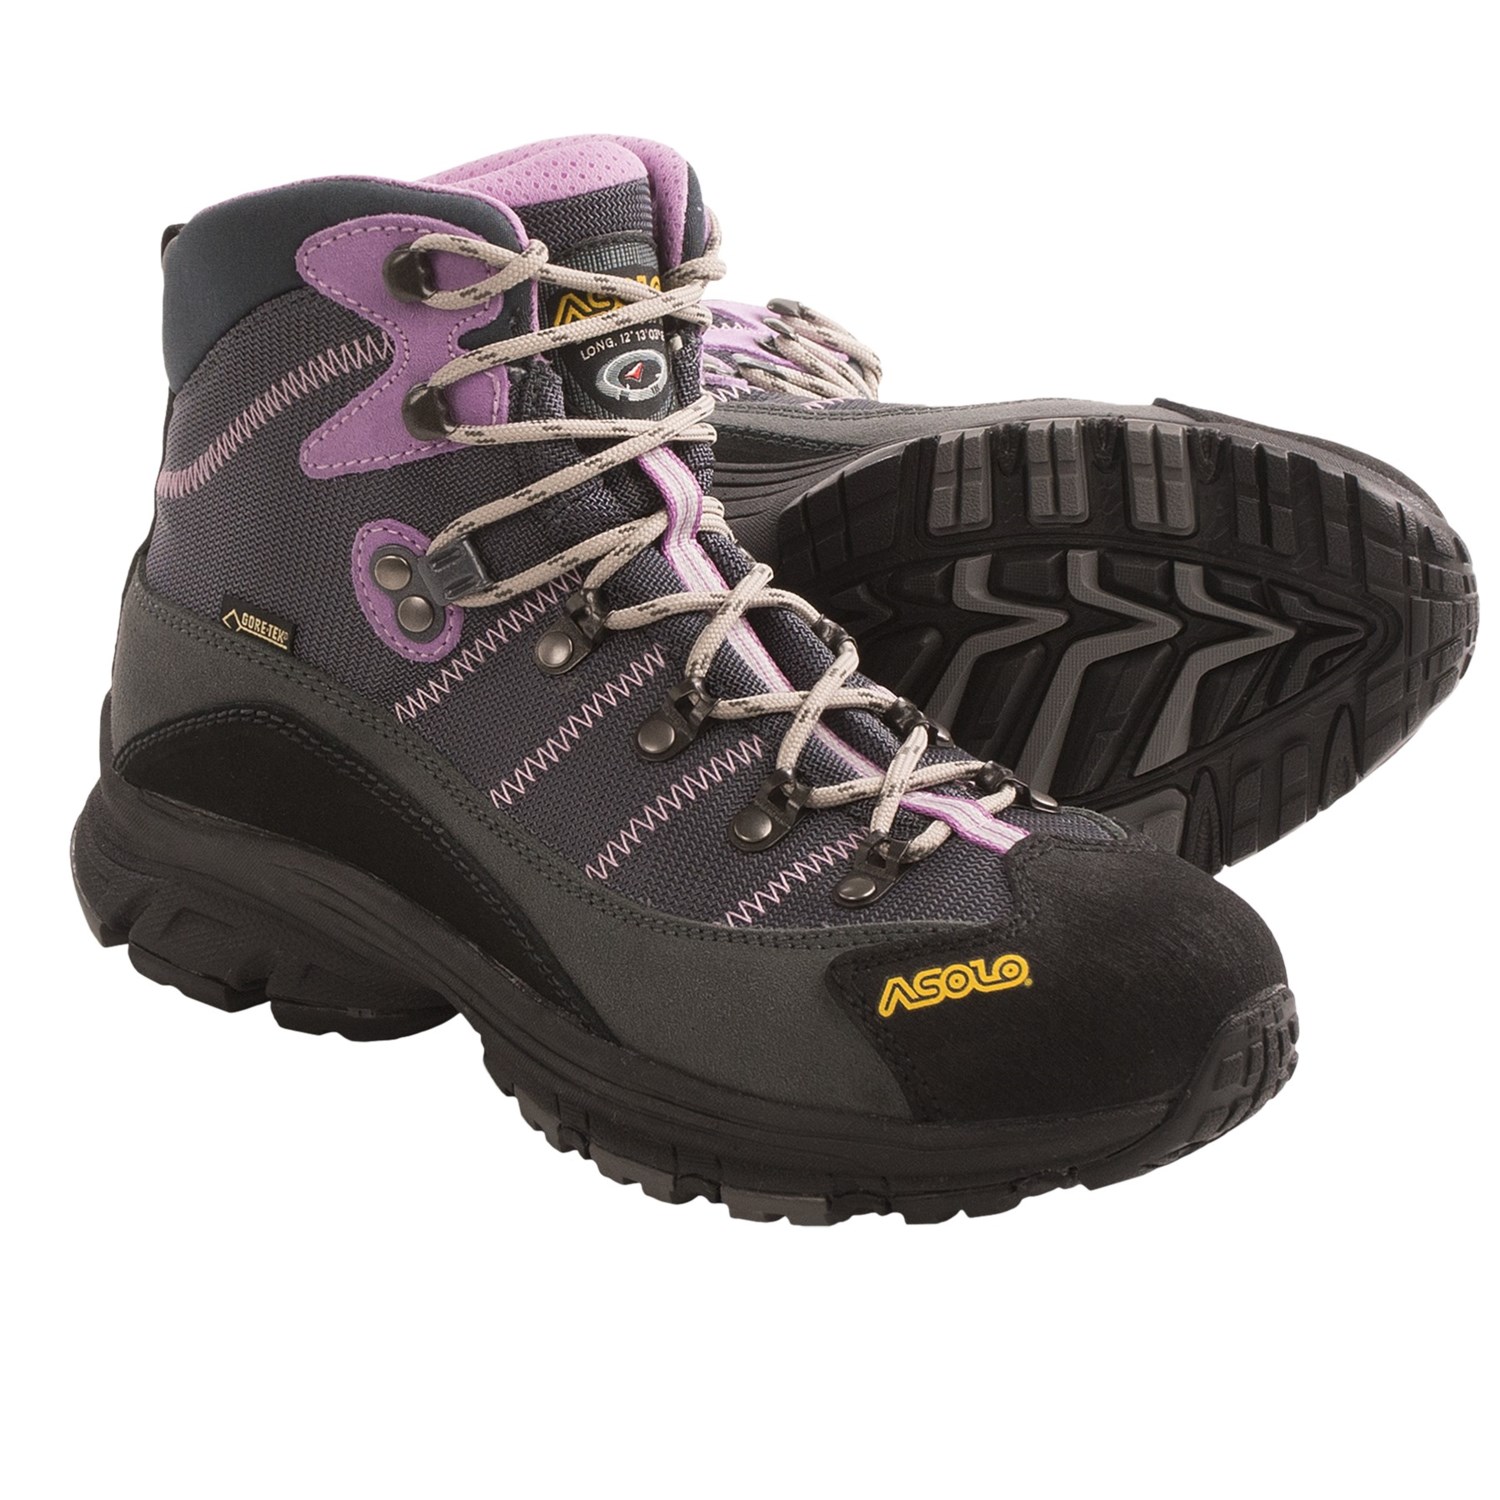 Asolo Horizon 1 Gore-Tex® Hiking Boots (For Women) 7943T - Save 44%